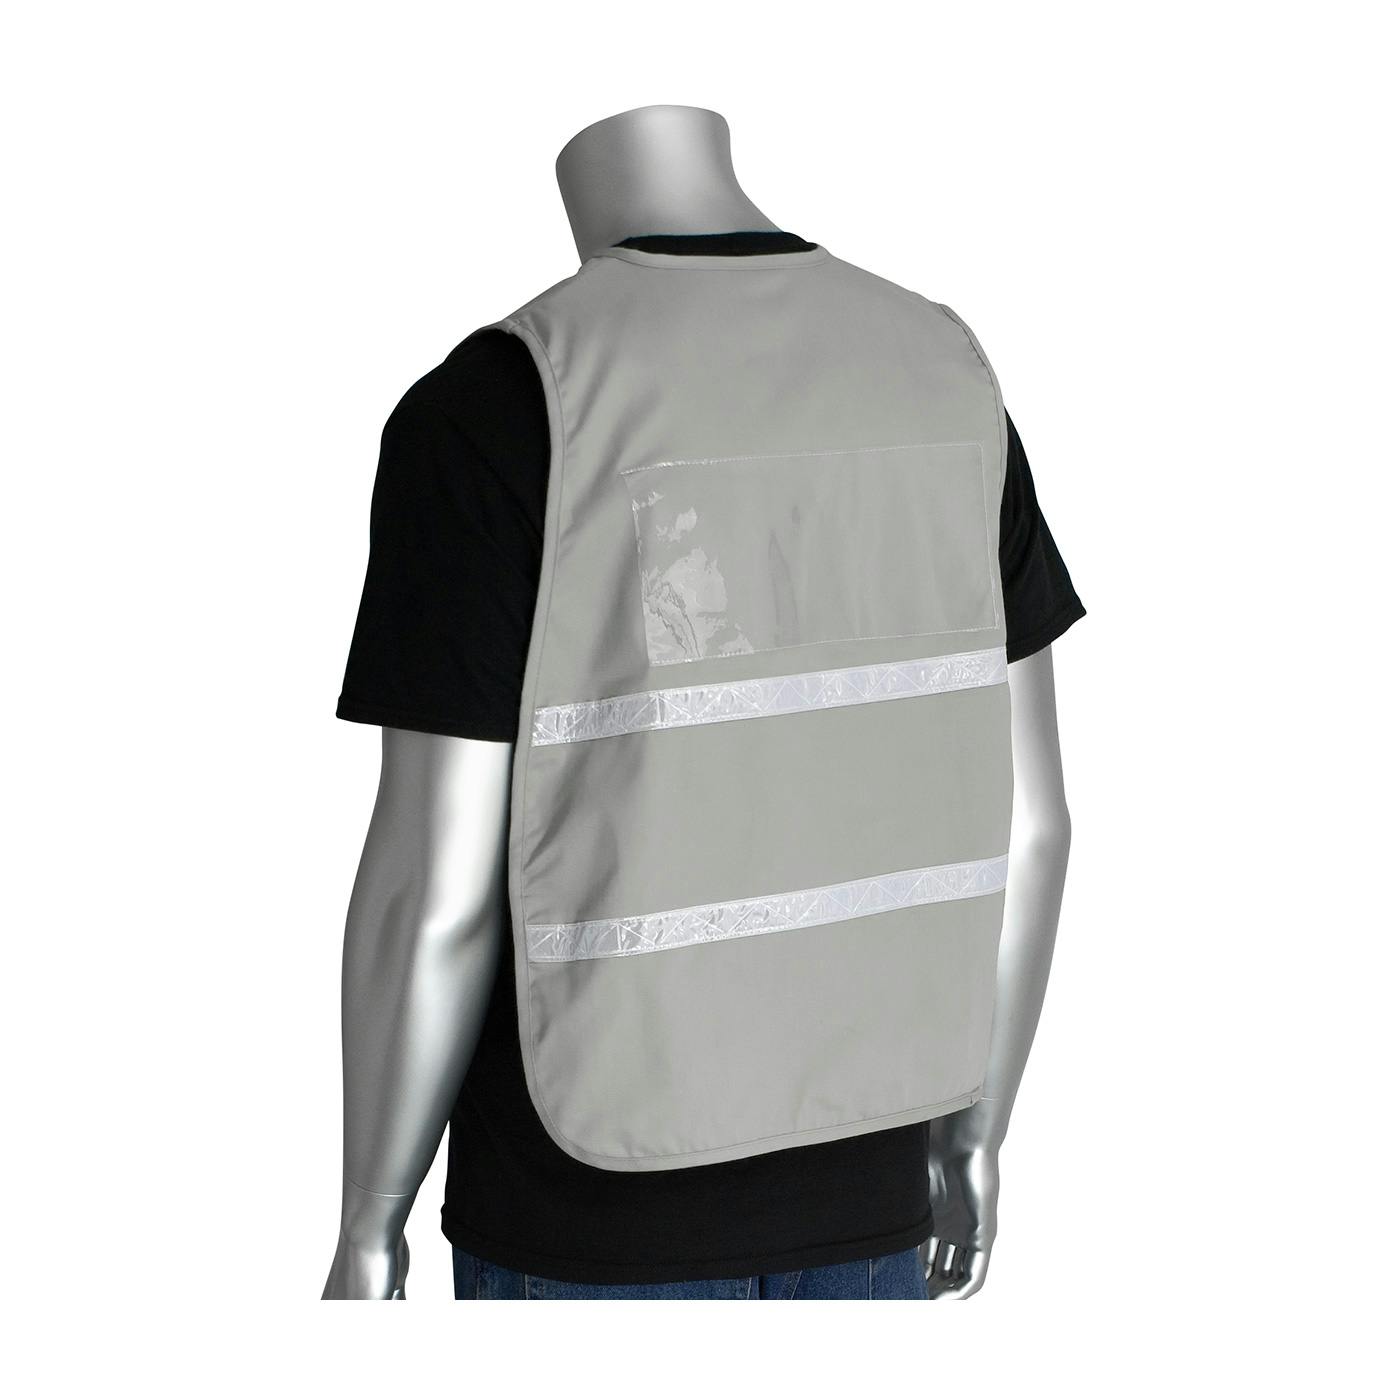 Non-ANSI Incident Command Vest - Cotton/Polyester Blend, Gray (300-2515)_0